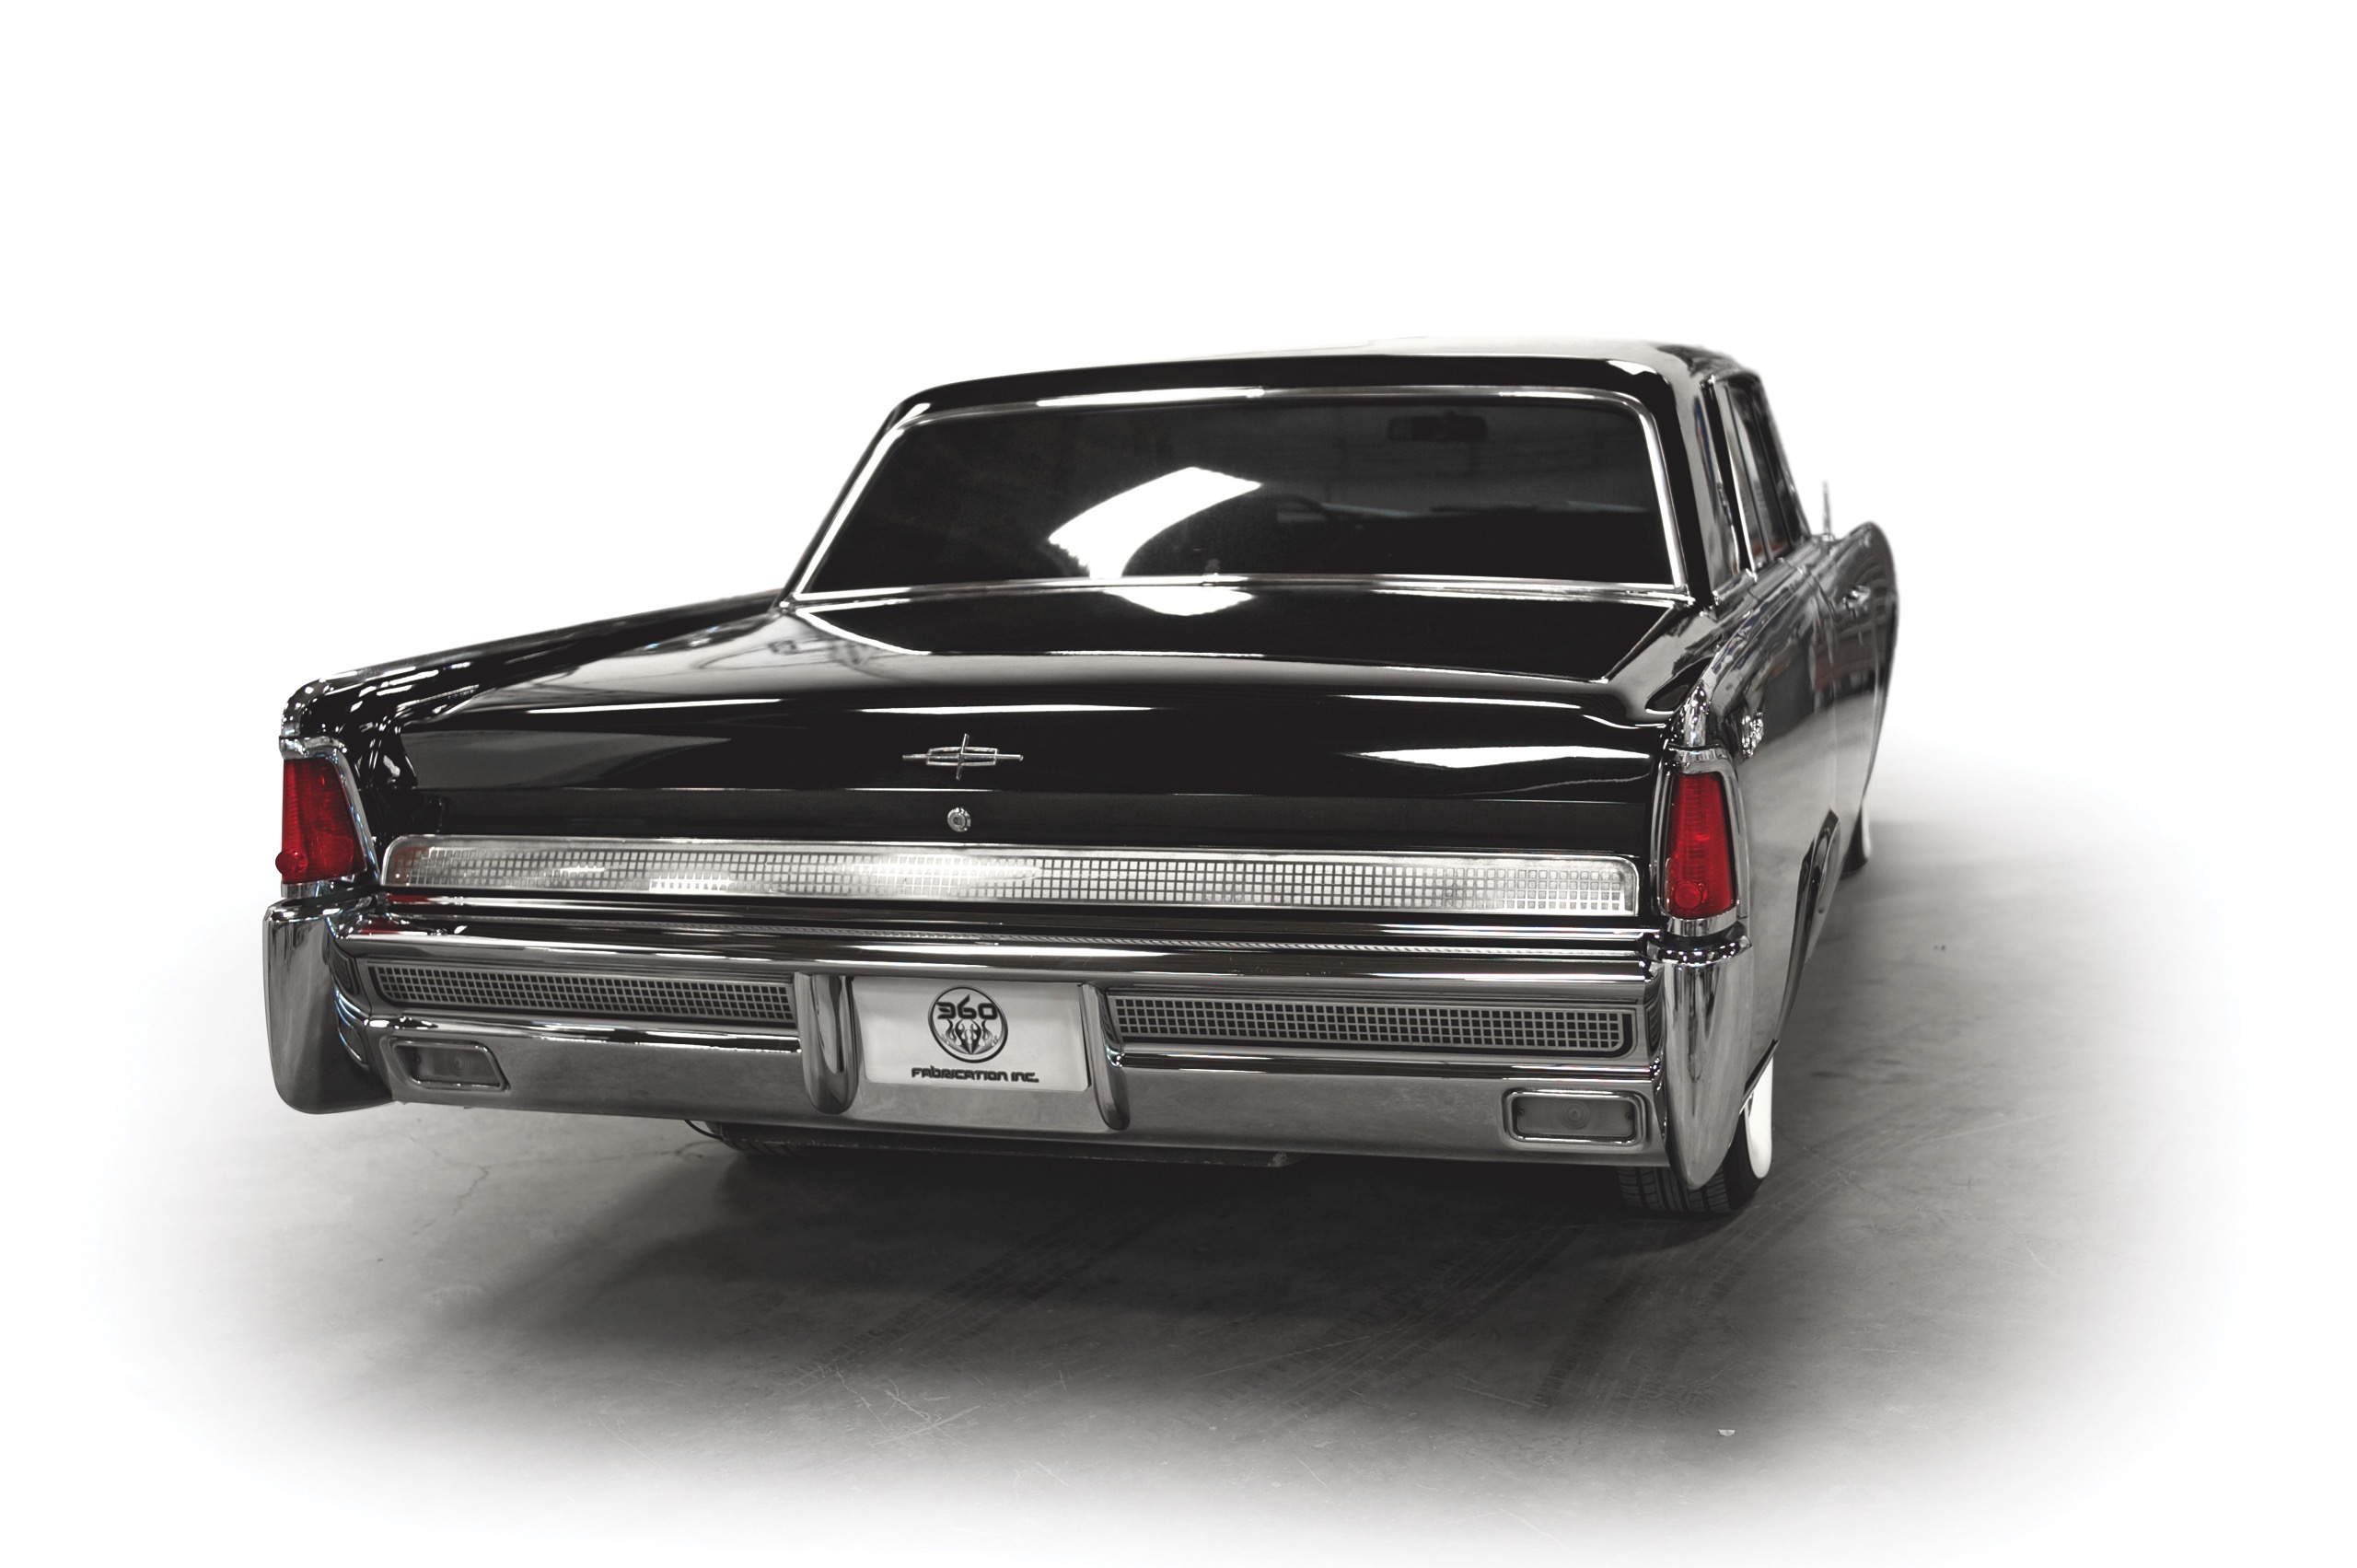 Don't be a H8R: 360 Fabrication's 1964 Lincoln Continental